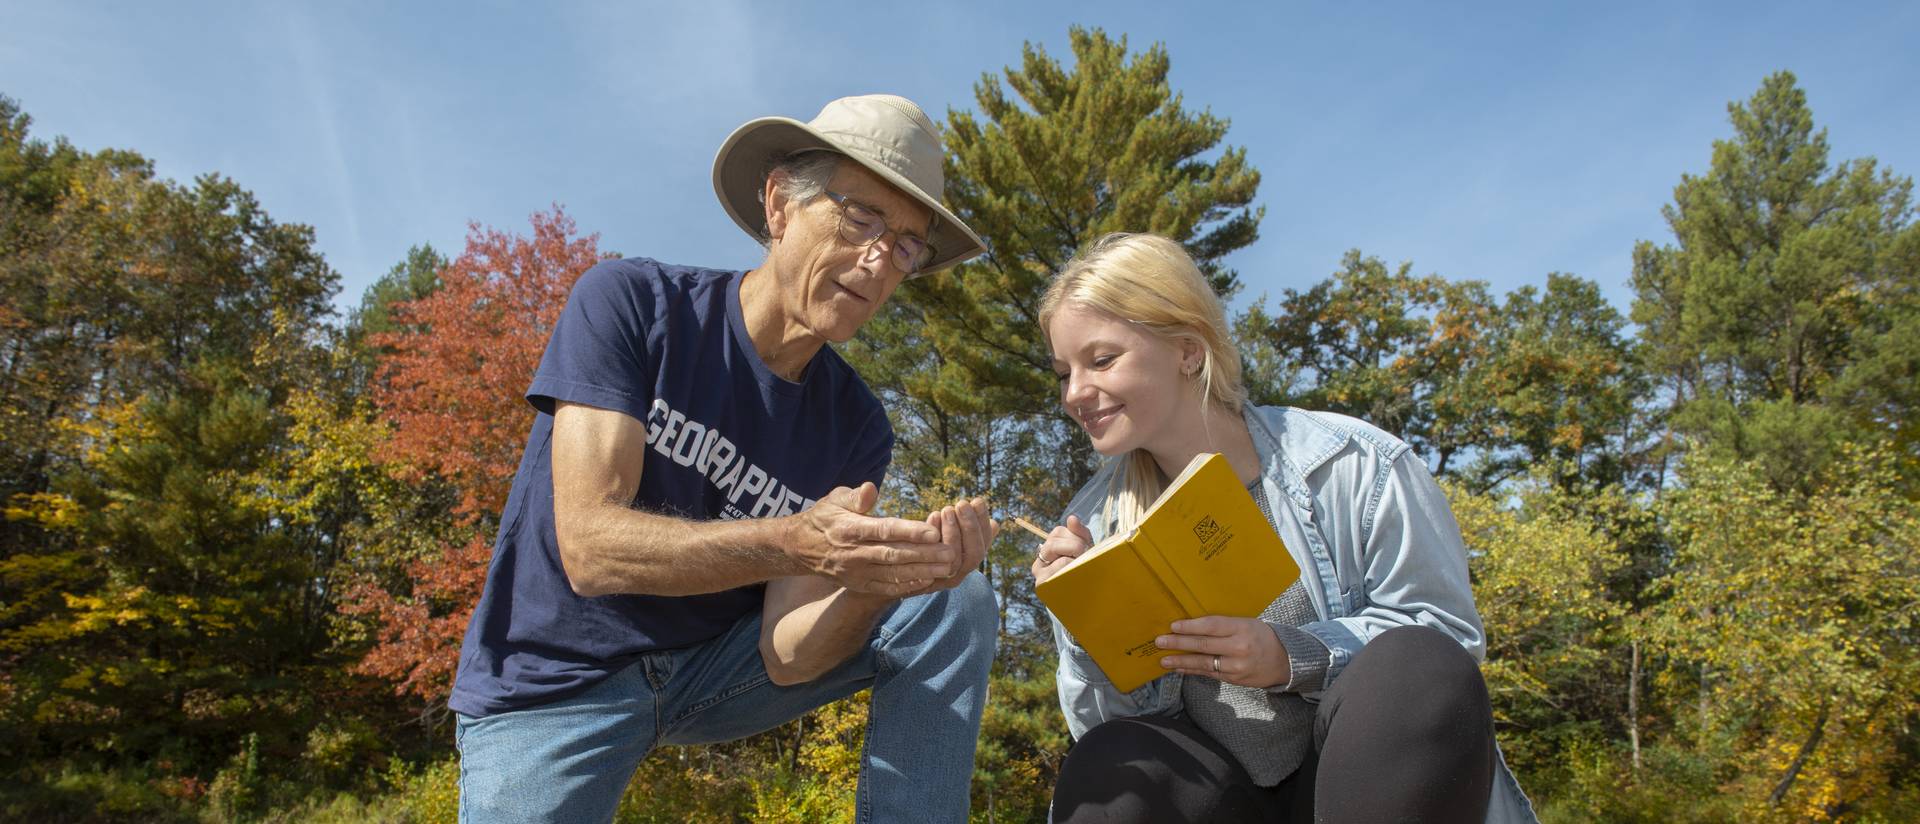 Dr. Douglas Faulkner, professor of geography, and Grace Bowe, an environmental studies major, examine the banks of western Wisconsin rivers as part of a faculty-undergraduate student research project. (Photo by Shane Opatz)